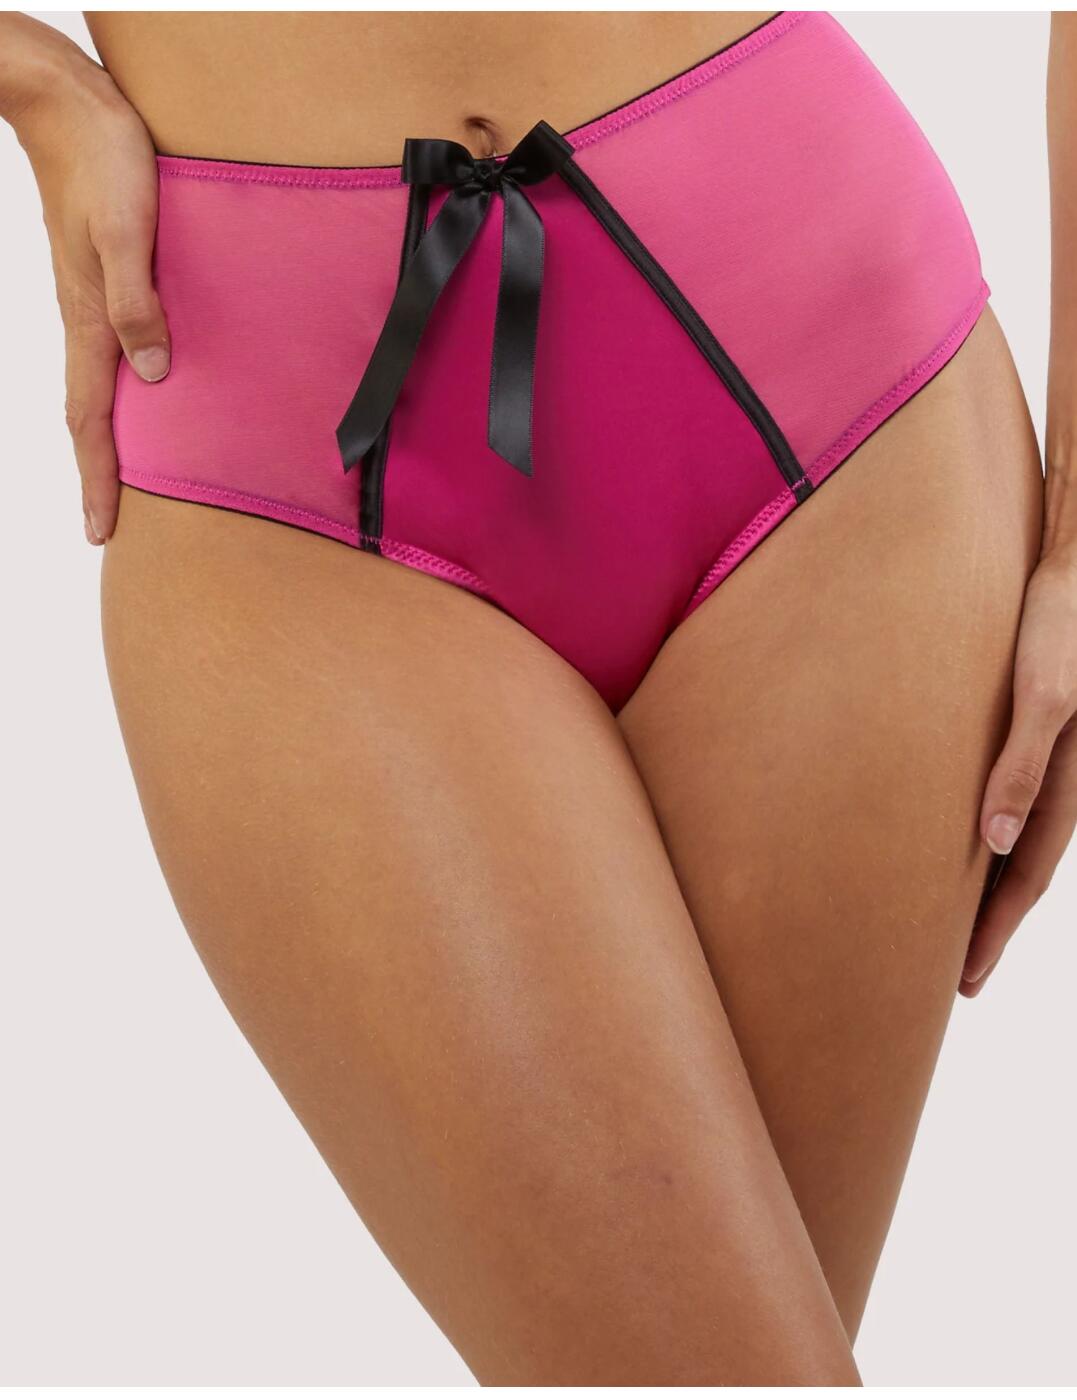 BPHW130P Playful Promises Bettie Page Inga Mesh High Waisted Brief - BPHW130P Pink 